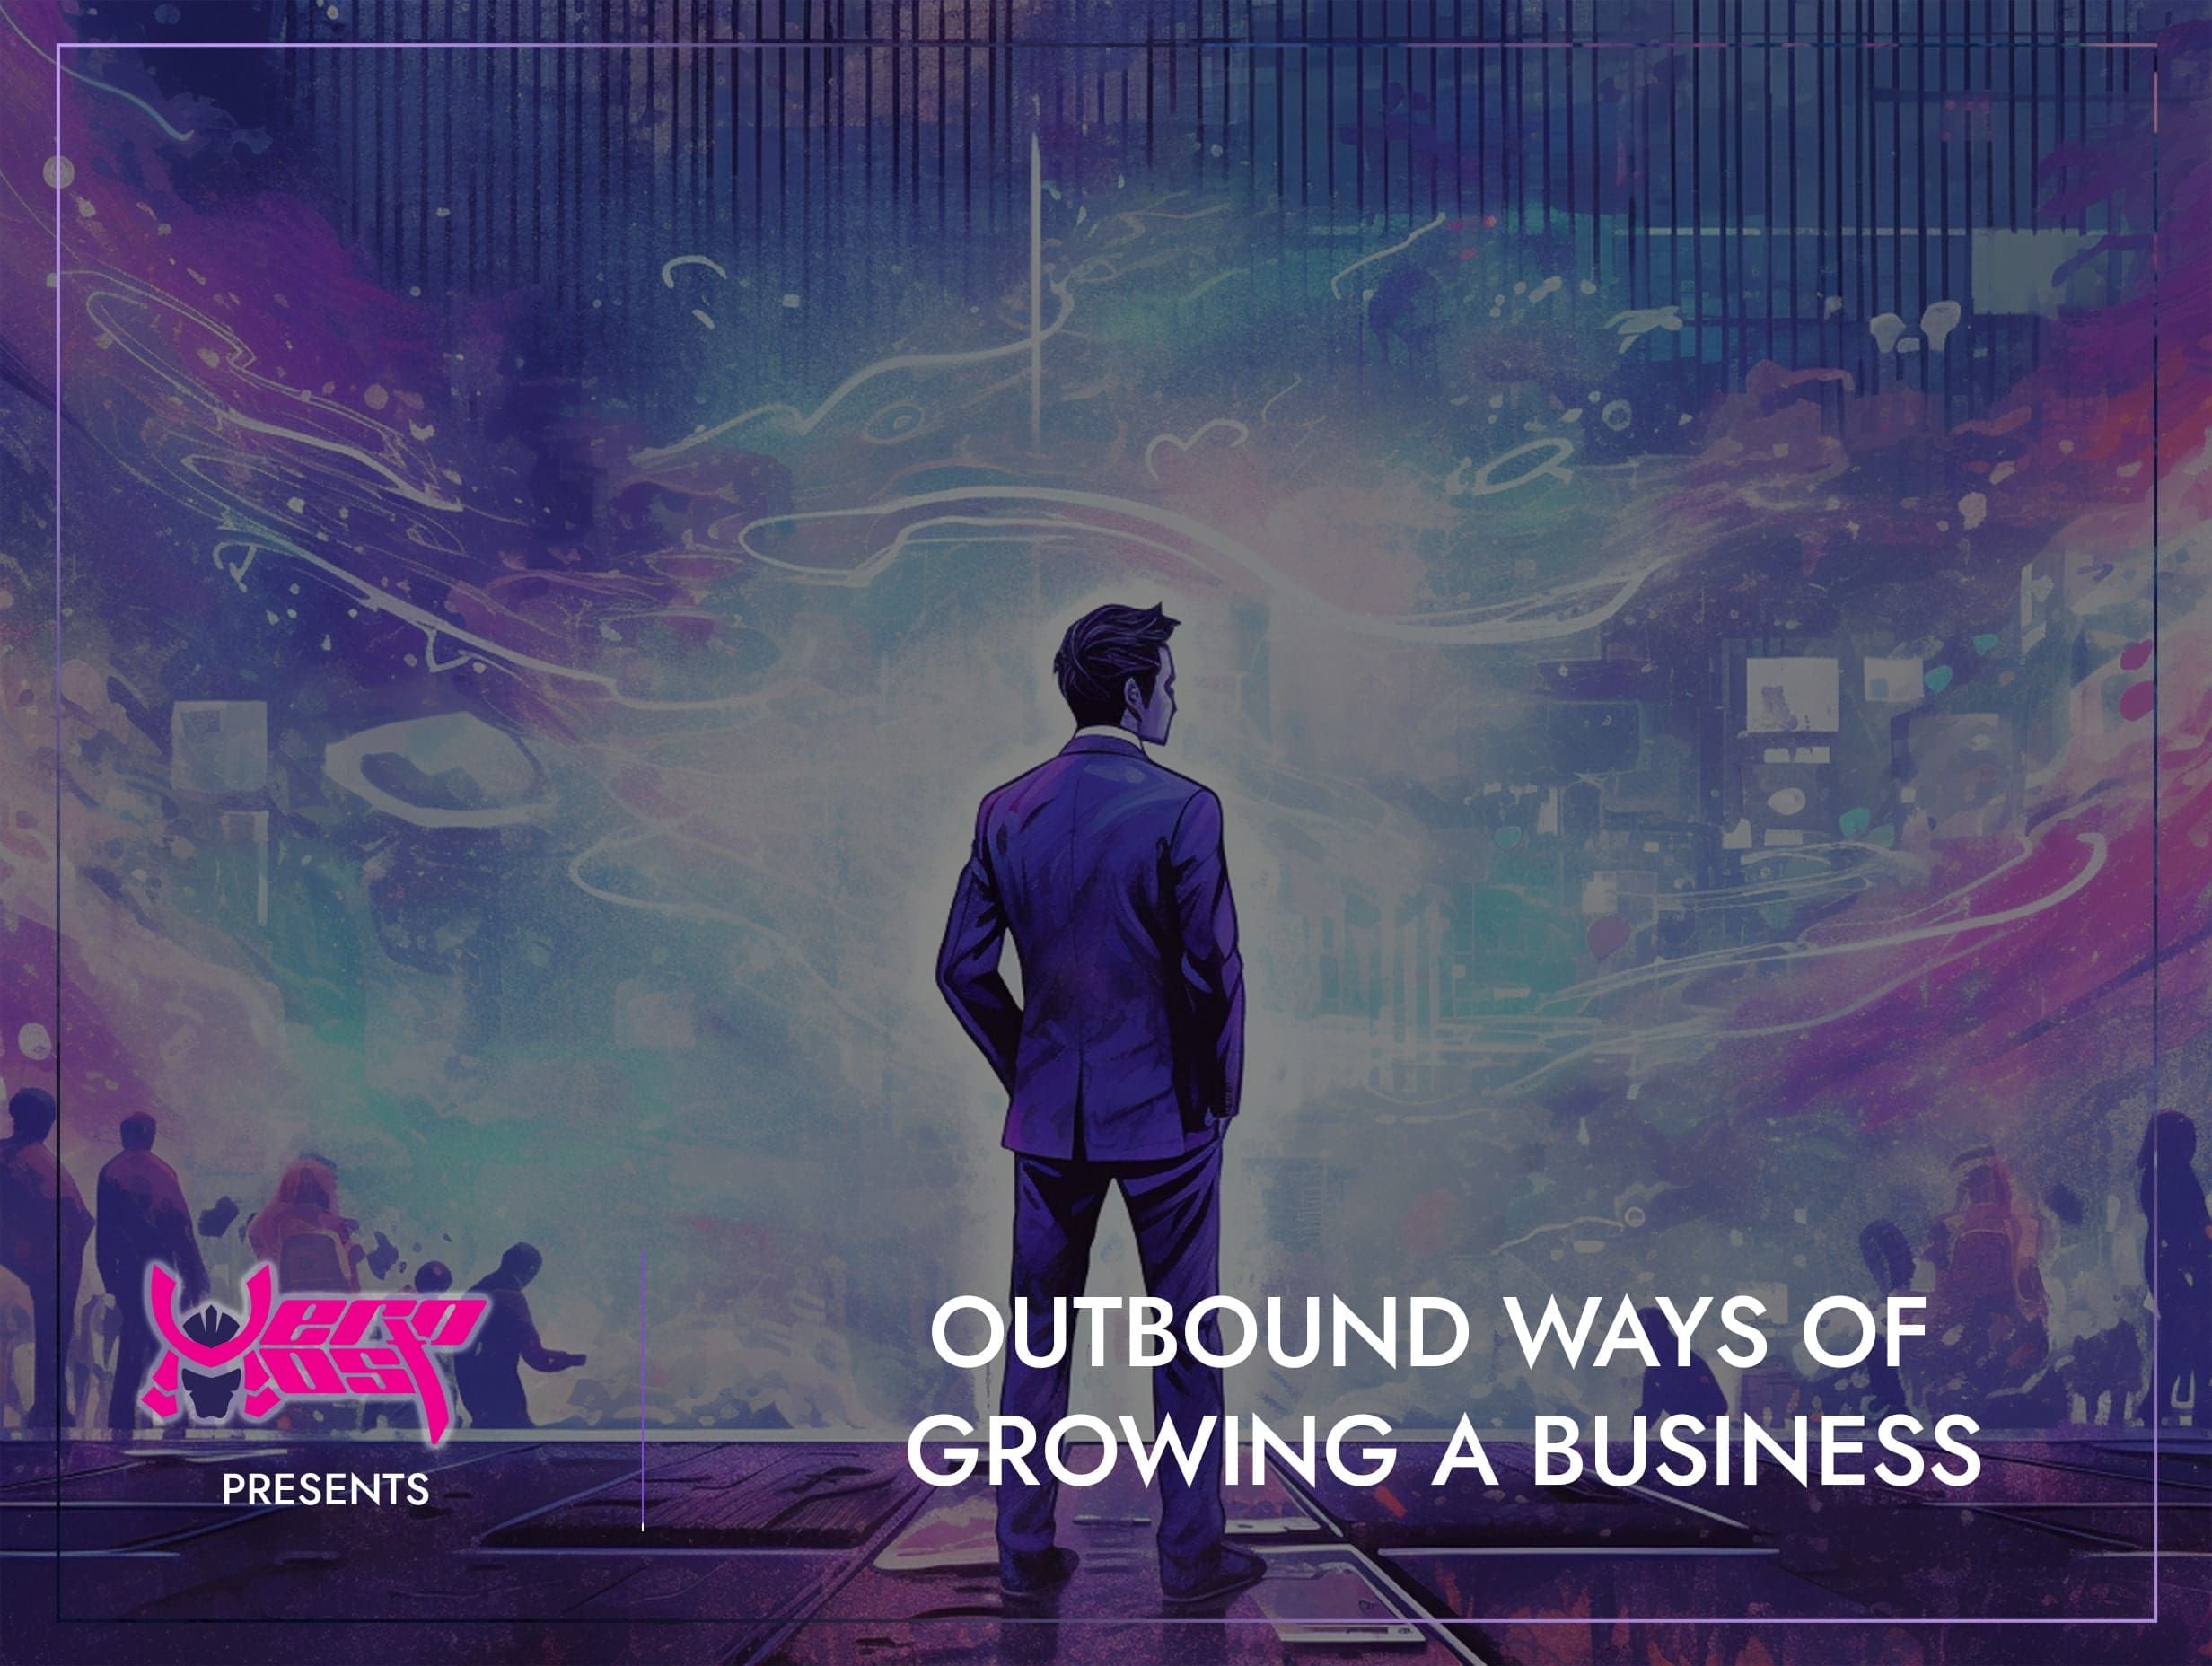 Outbound ways of Growing a Business